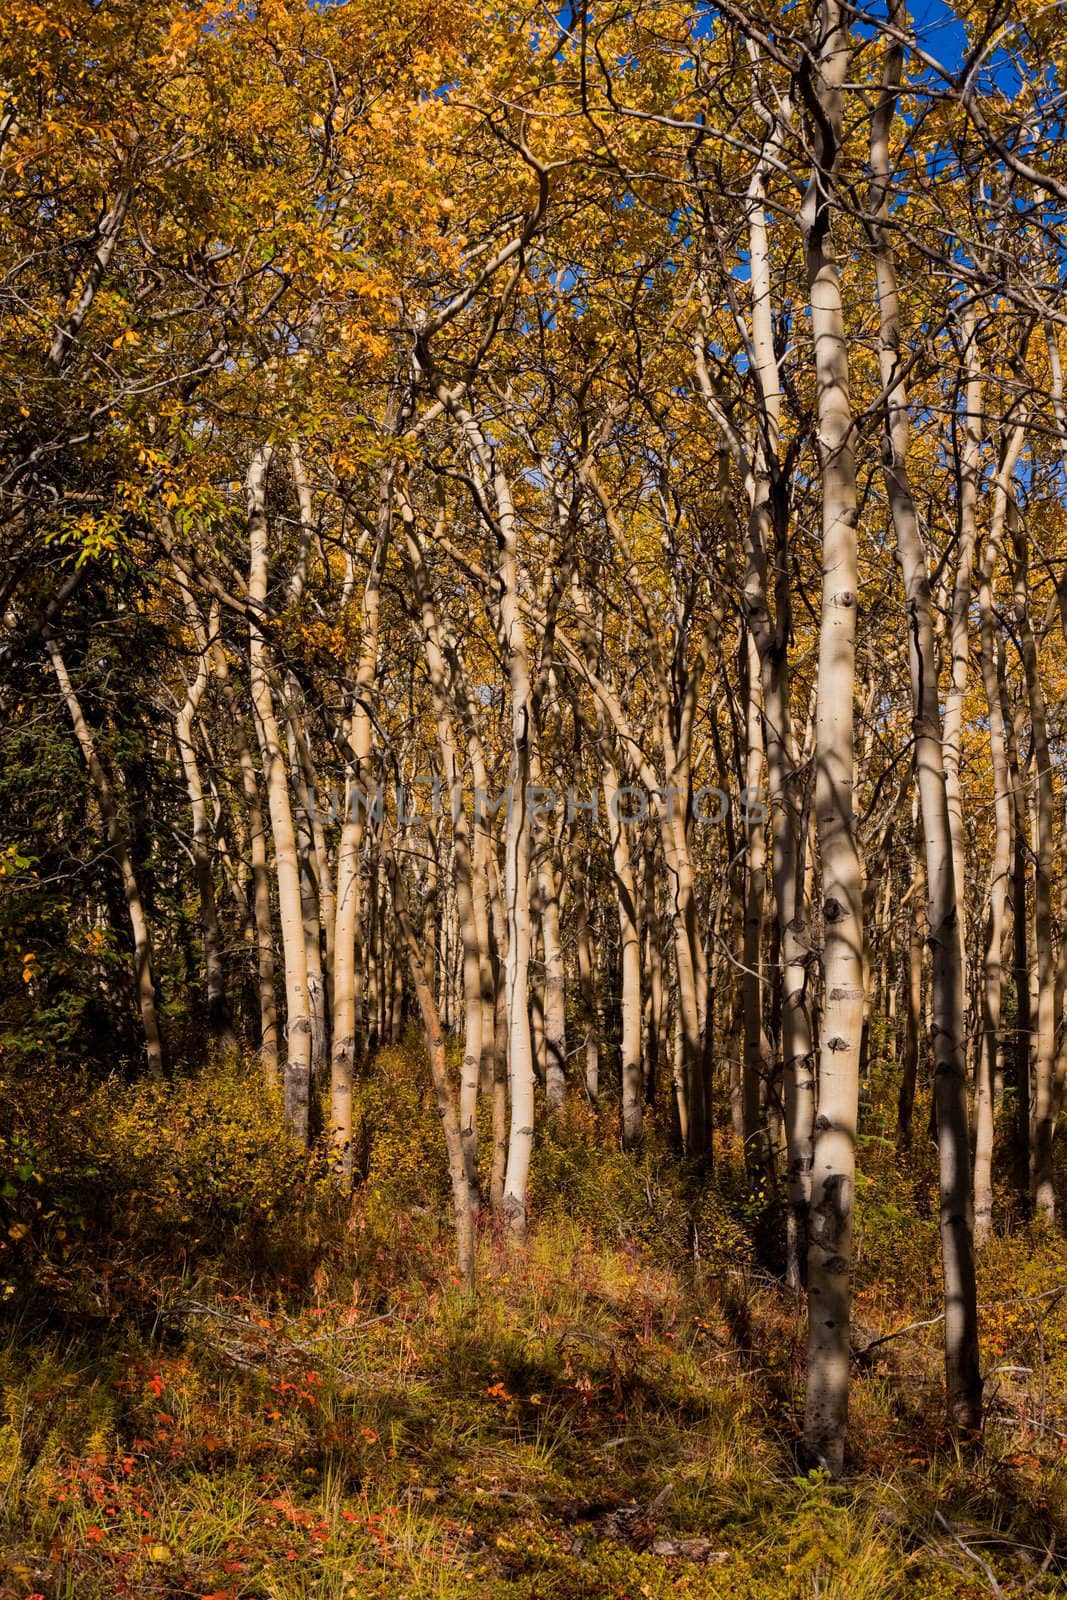 Golden fall colors in espen (Populus tremuloides) stand in boreal forest of Yukon Territory, Canada.